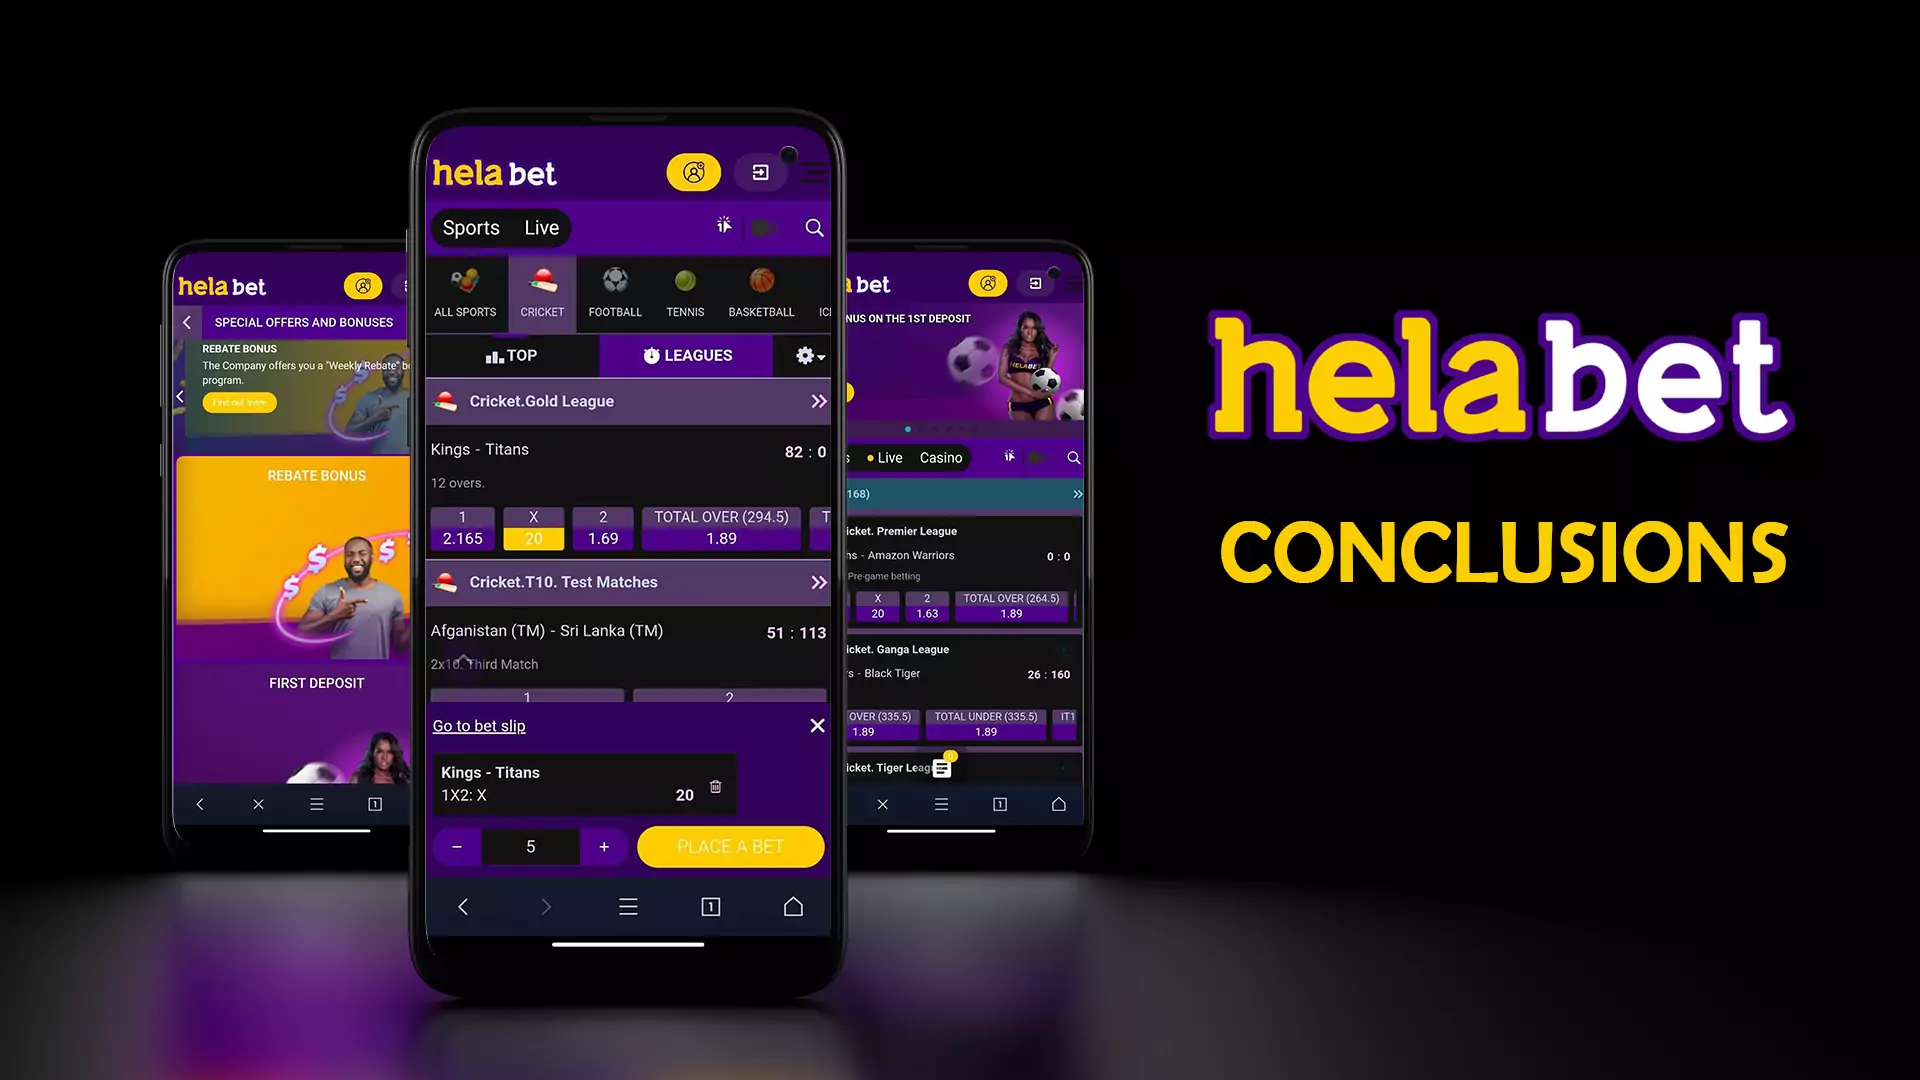 Read the conclusions about the quality of the Helabet app for Android and iOS.